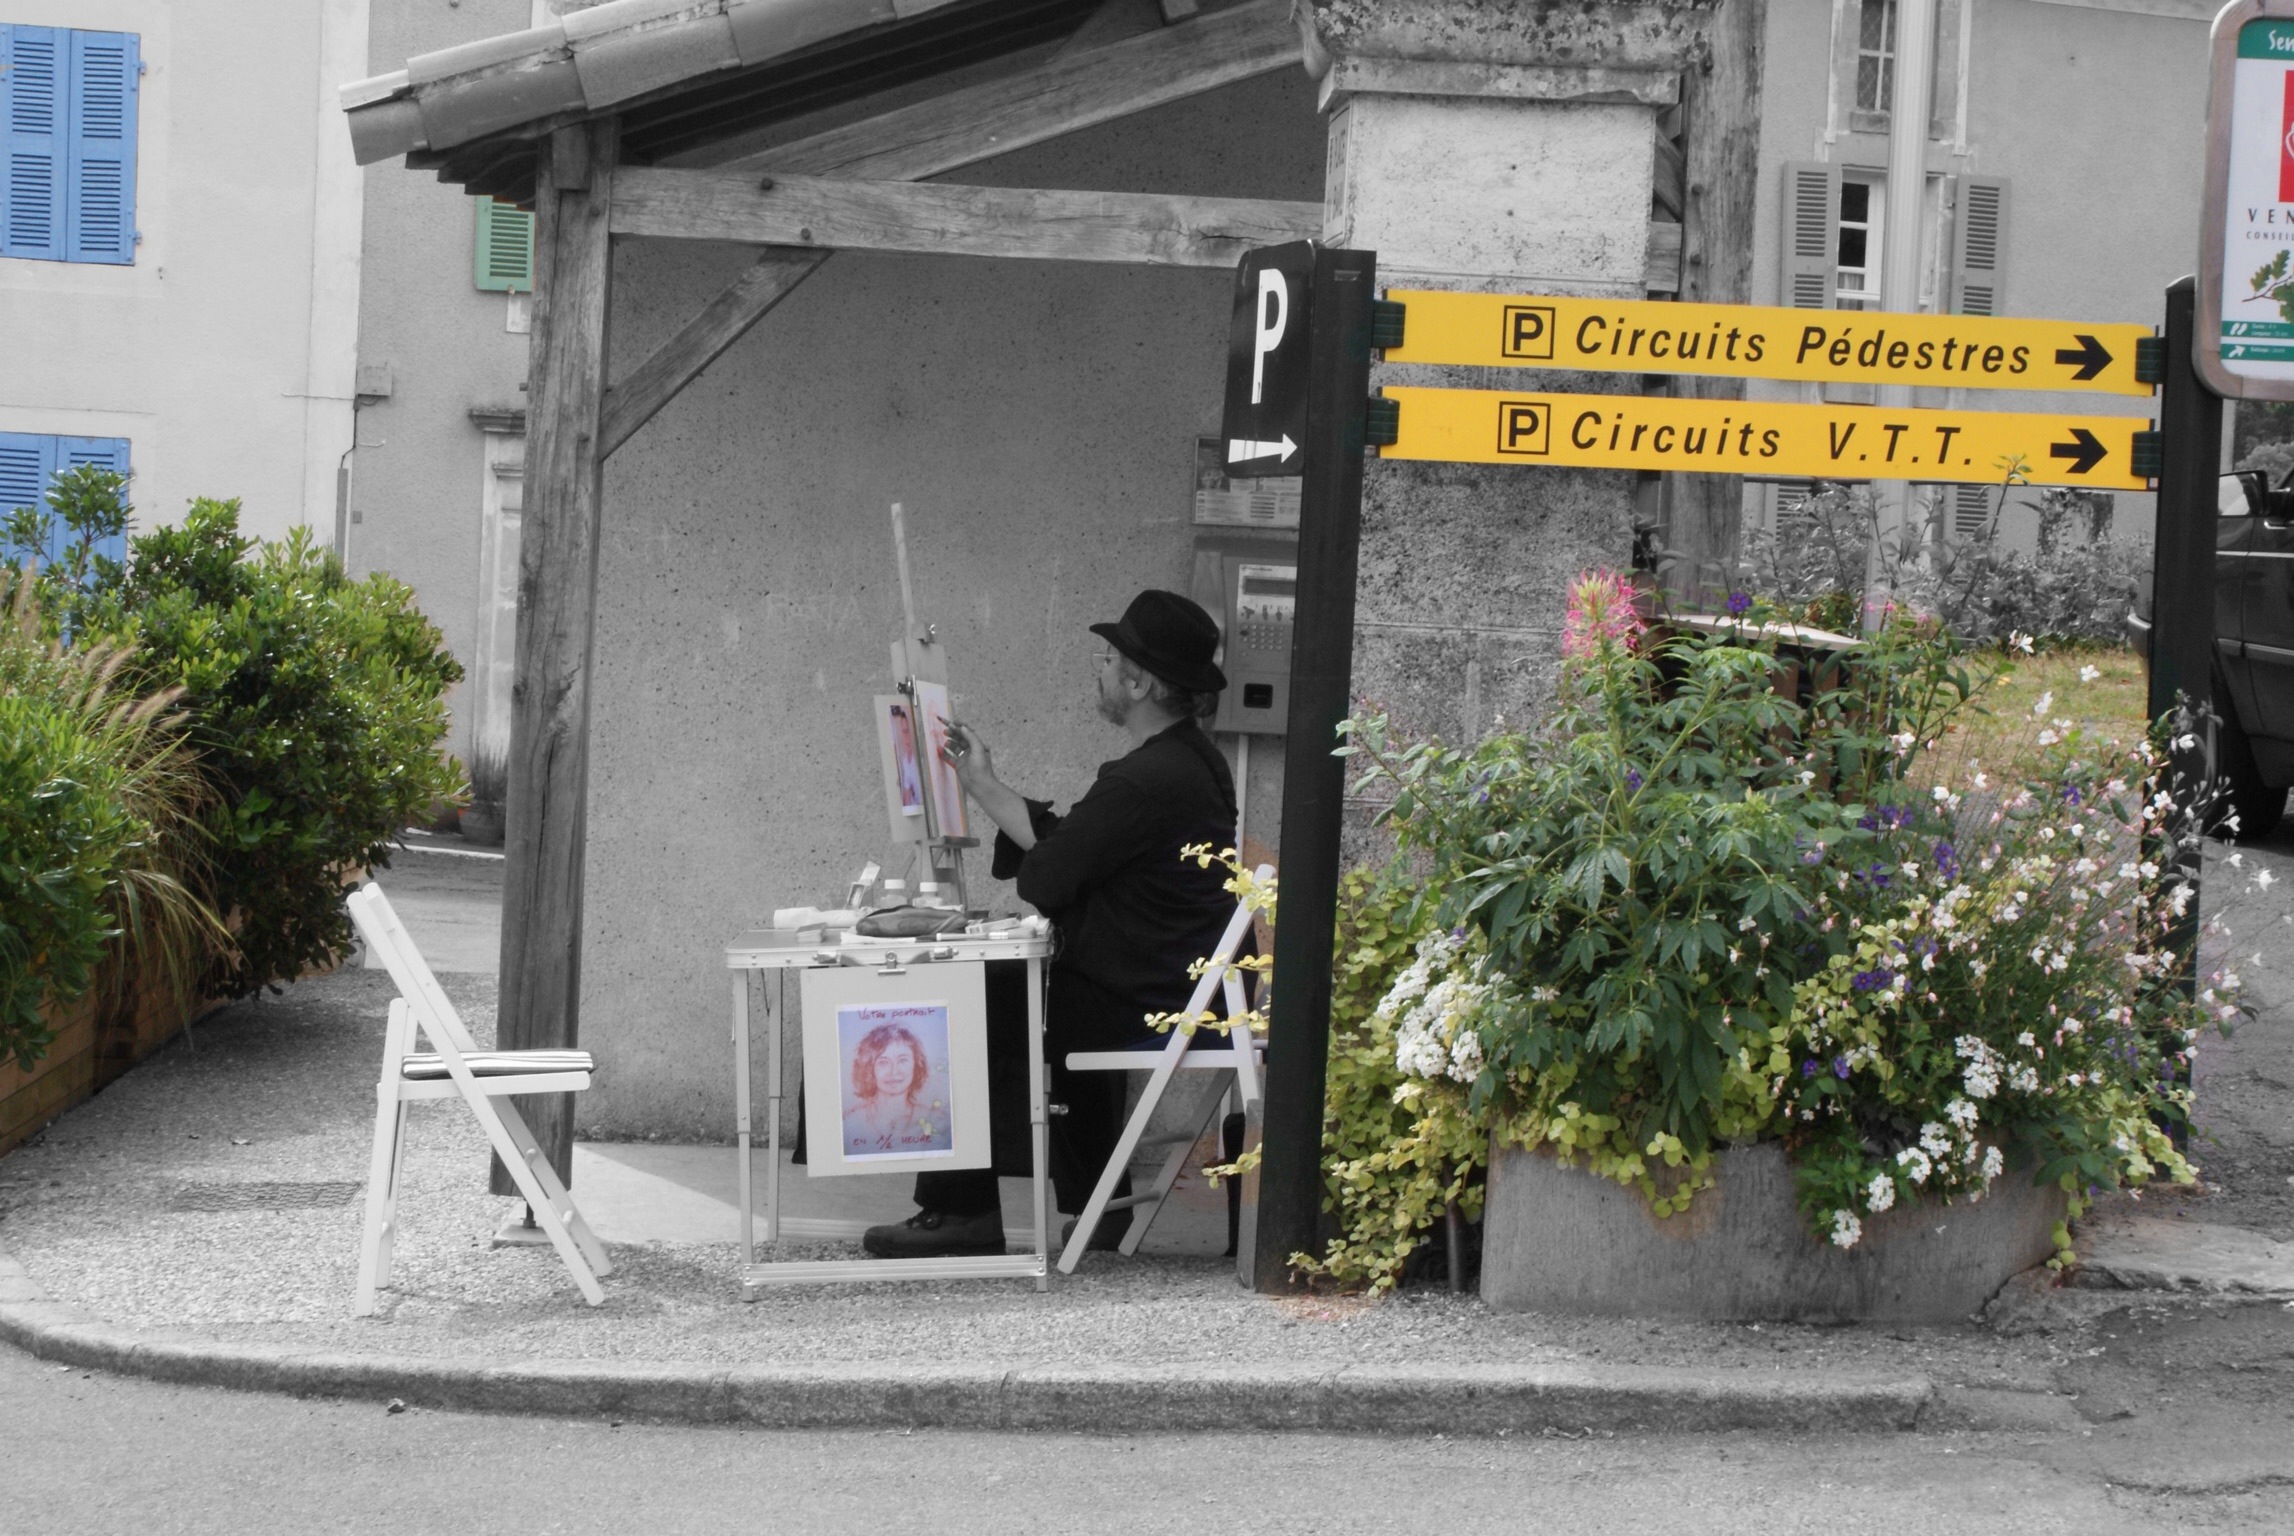 This artist was painting a view across the small village in central France